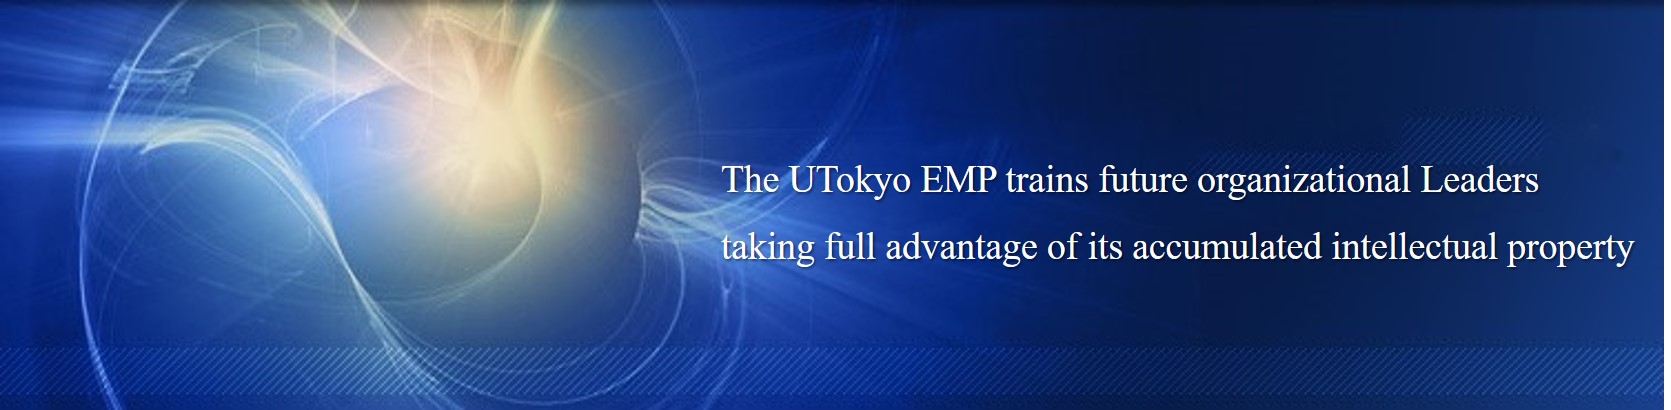 The Todai EMP trains future organizational leaders taking full advantage of its accumulated intellectual property